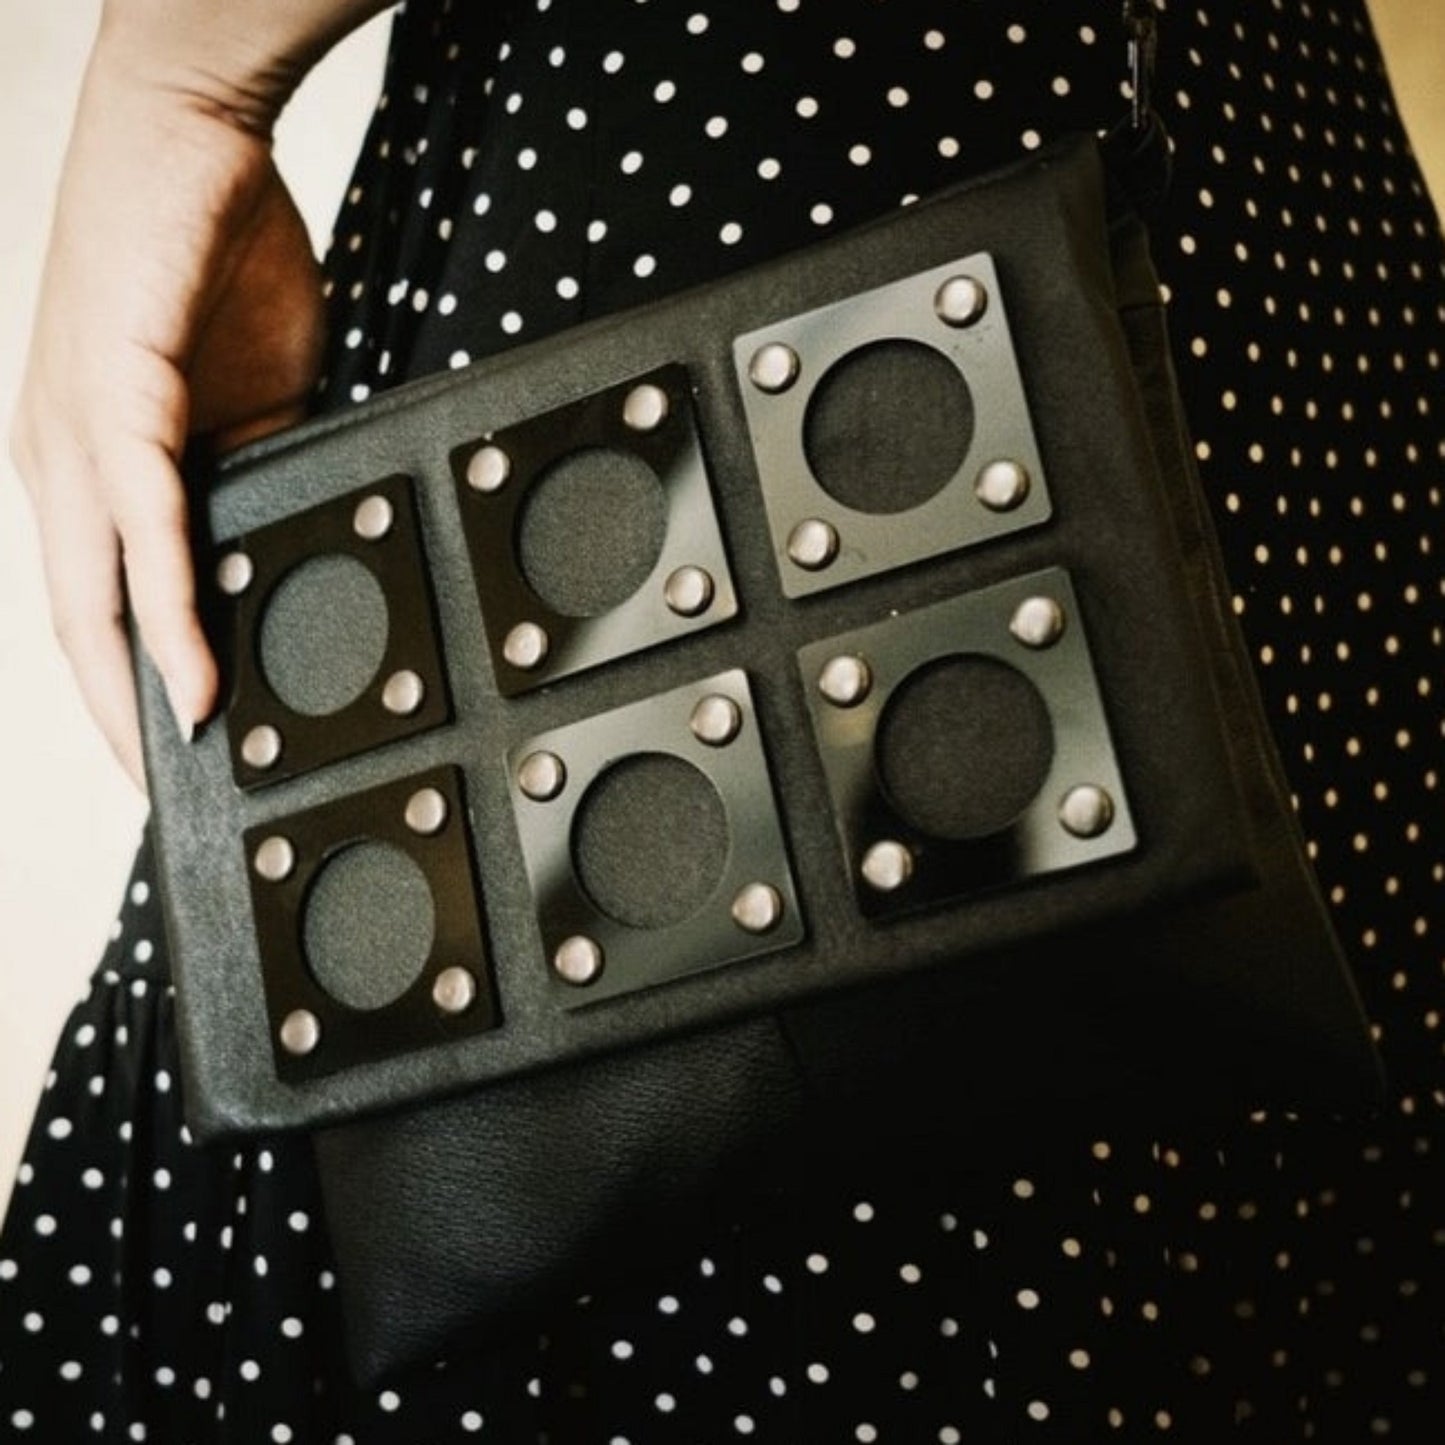 METANoIA black recycled leather small handbag with square and hollowed circle bamboo and walnut acrylic forms fashioned into a repetitive fashion. 